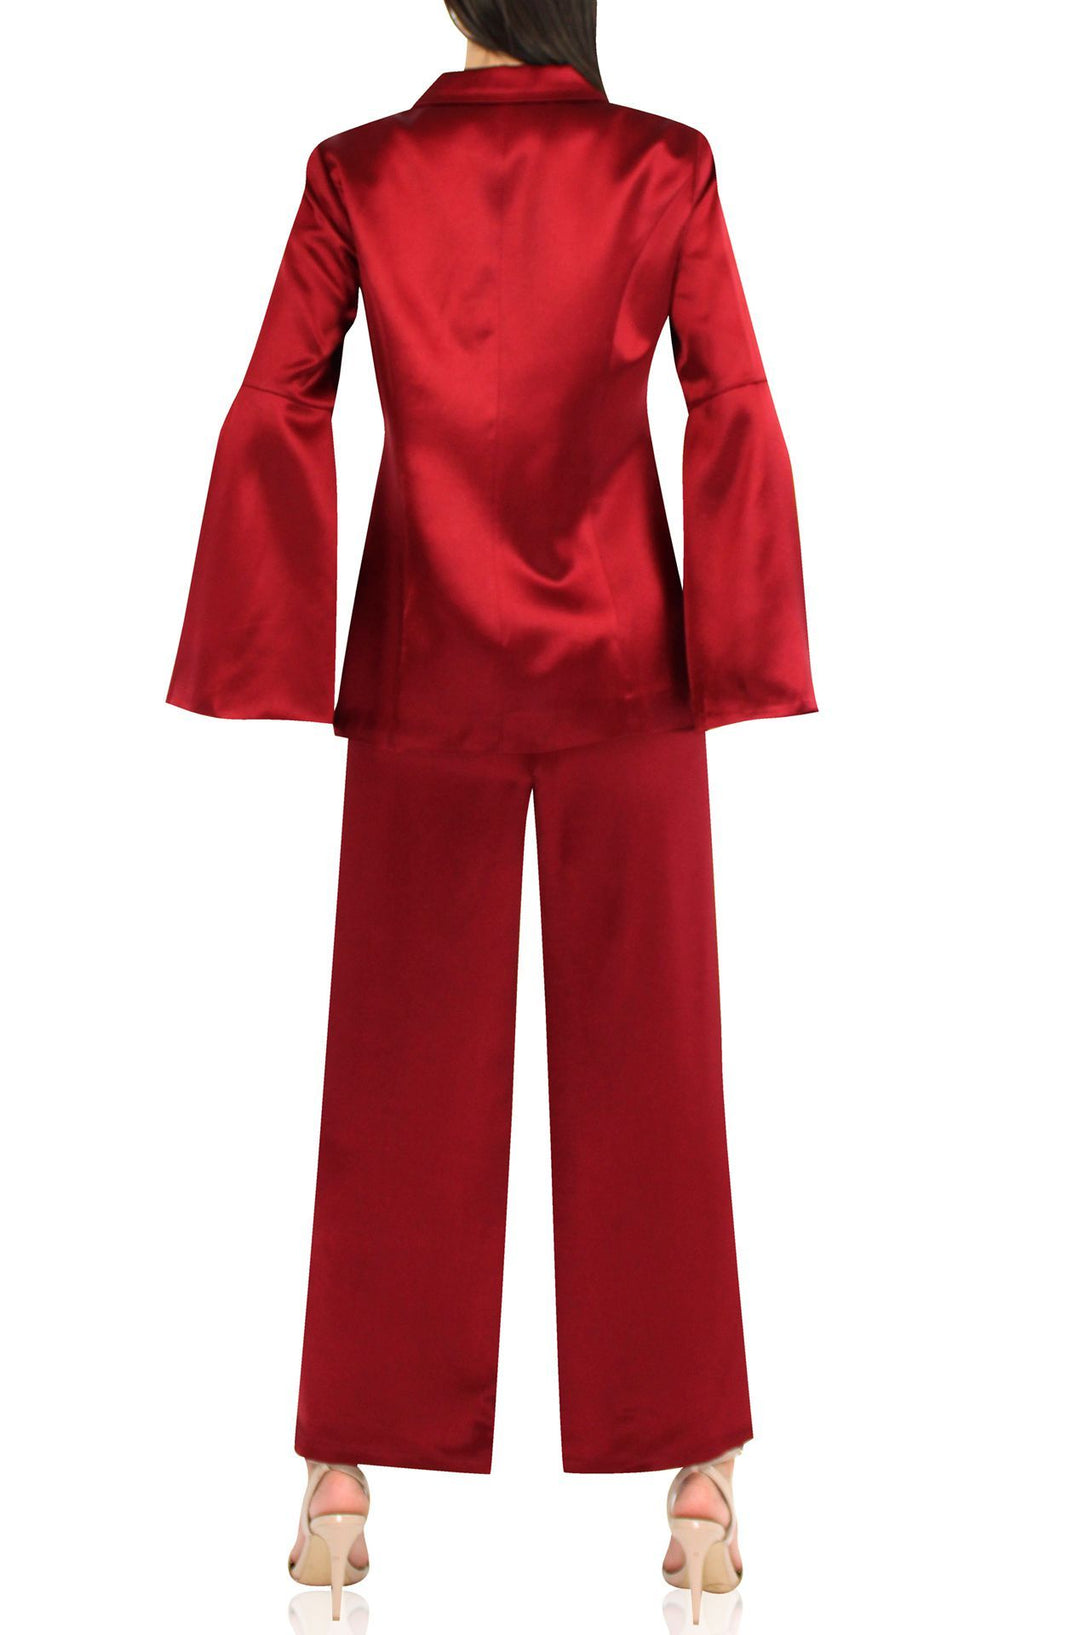 Kyle-Richards-Designer-Straight-Fit-Womens-Pants-In-Red